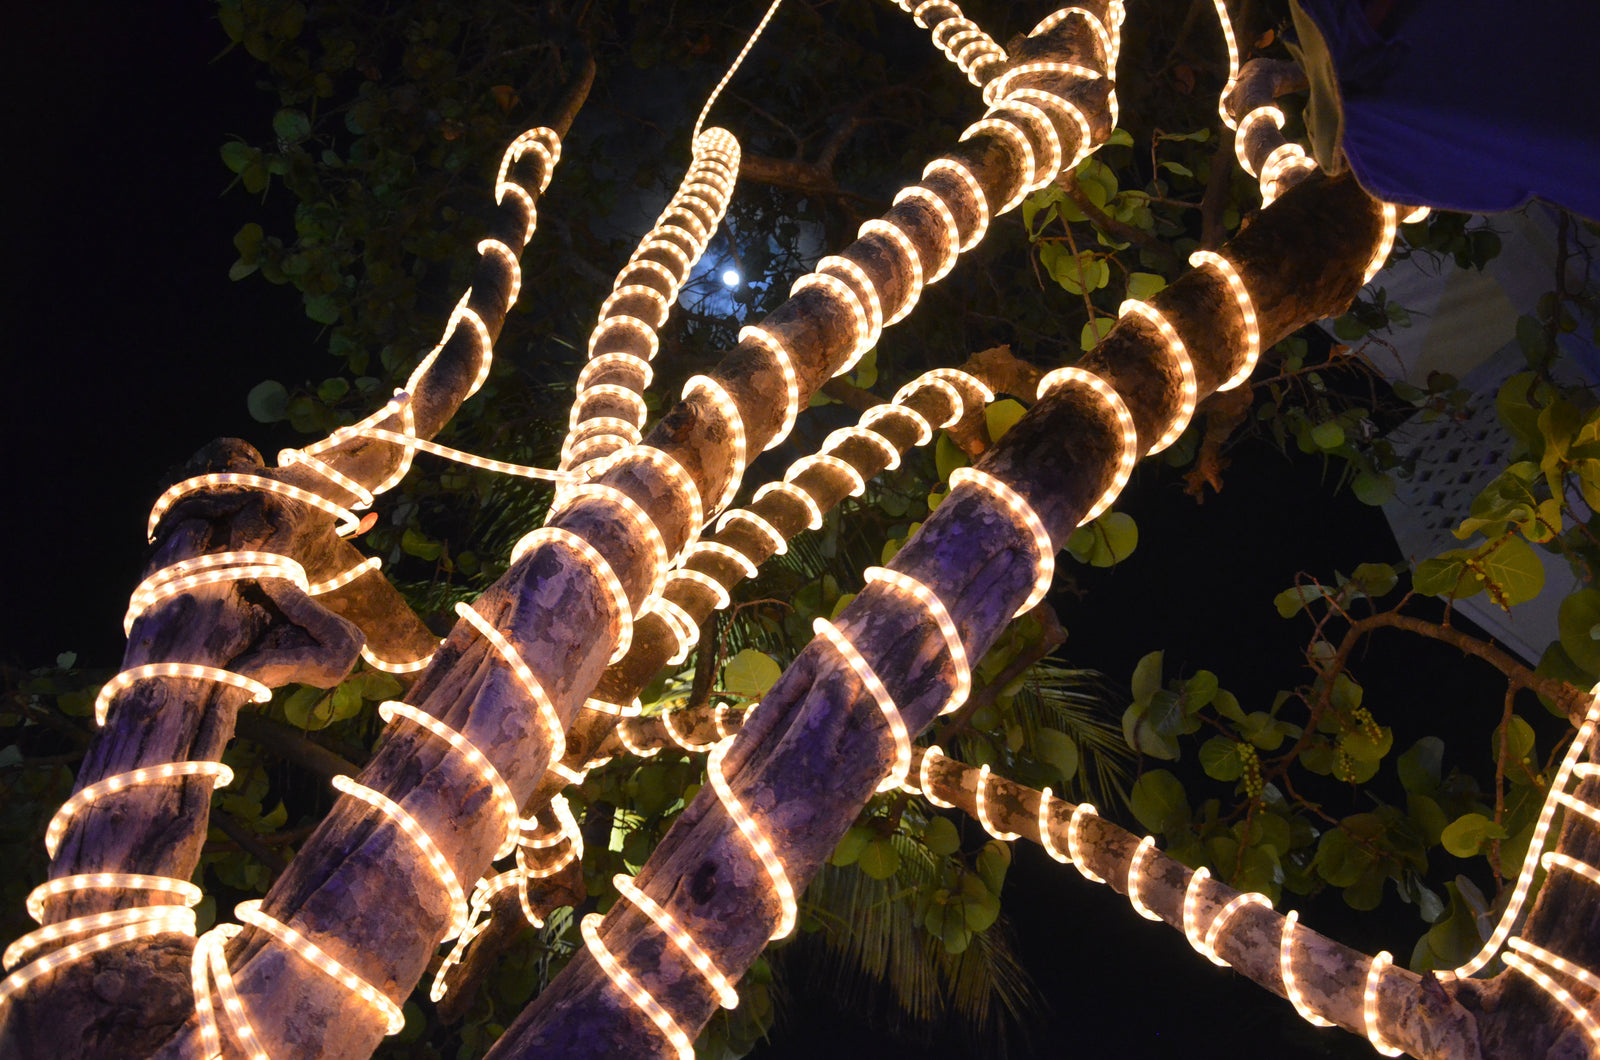 How to UseFestoon Lights to Light up Your Garden